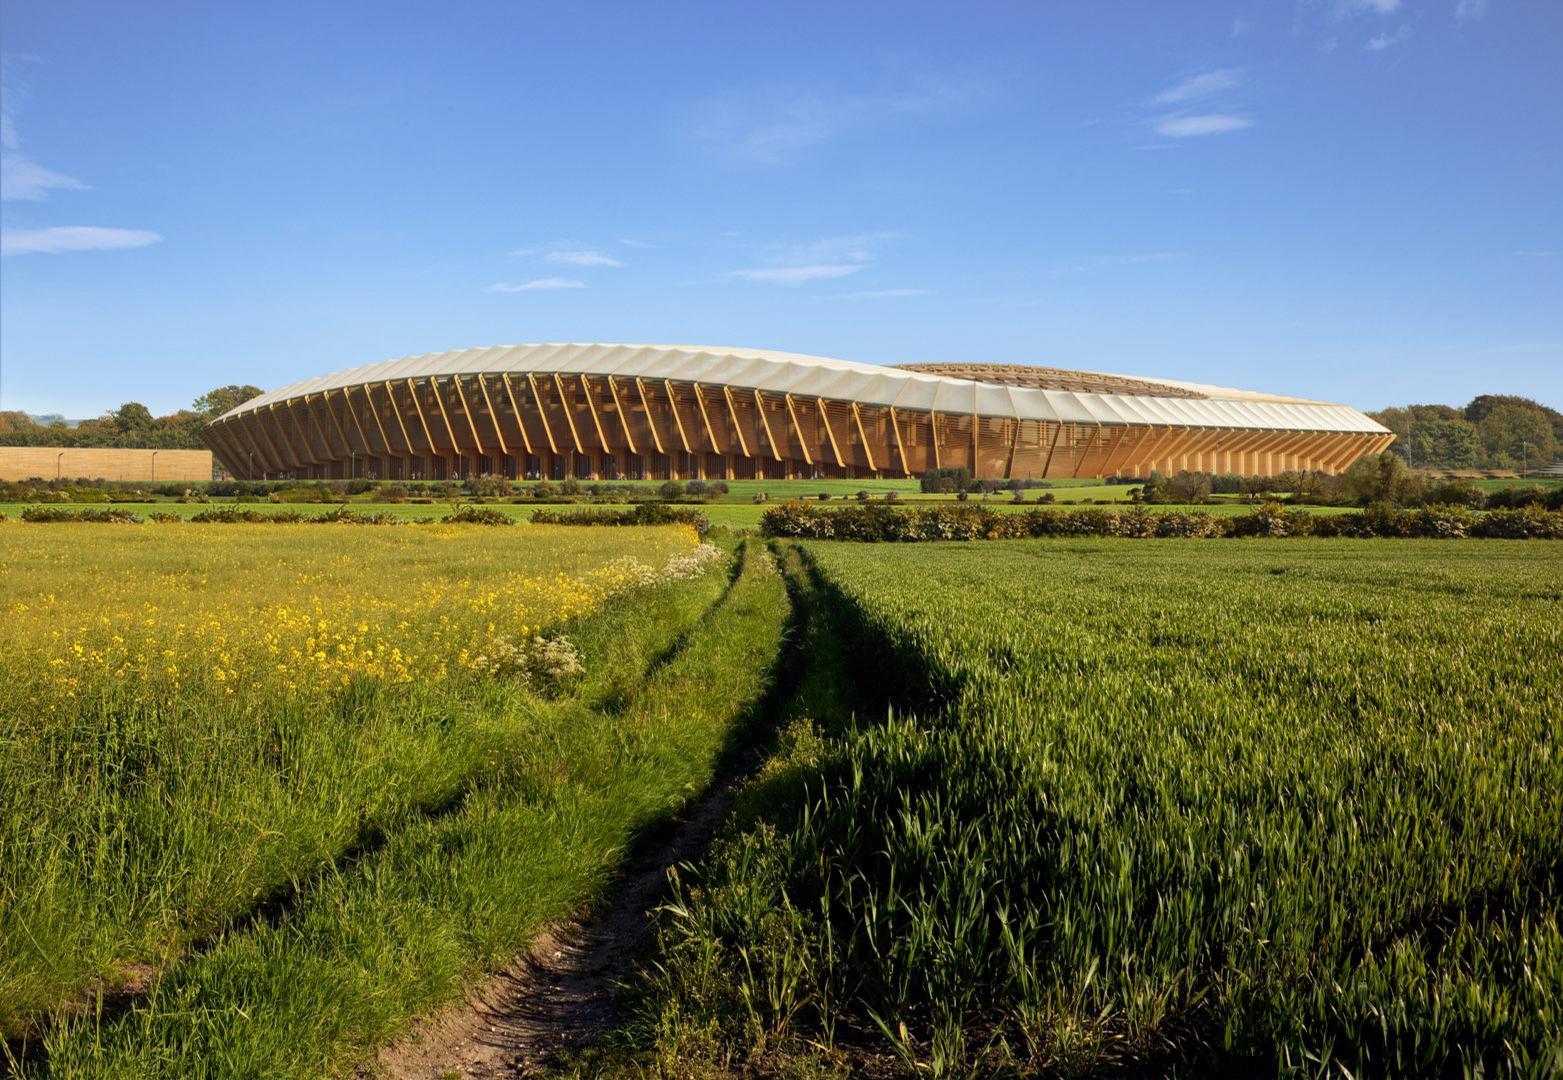 The 5,000-seat venue will be built near the UK town of Eastington
/ Zaha Hadid Architects/Forest Green Rovers FC